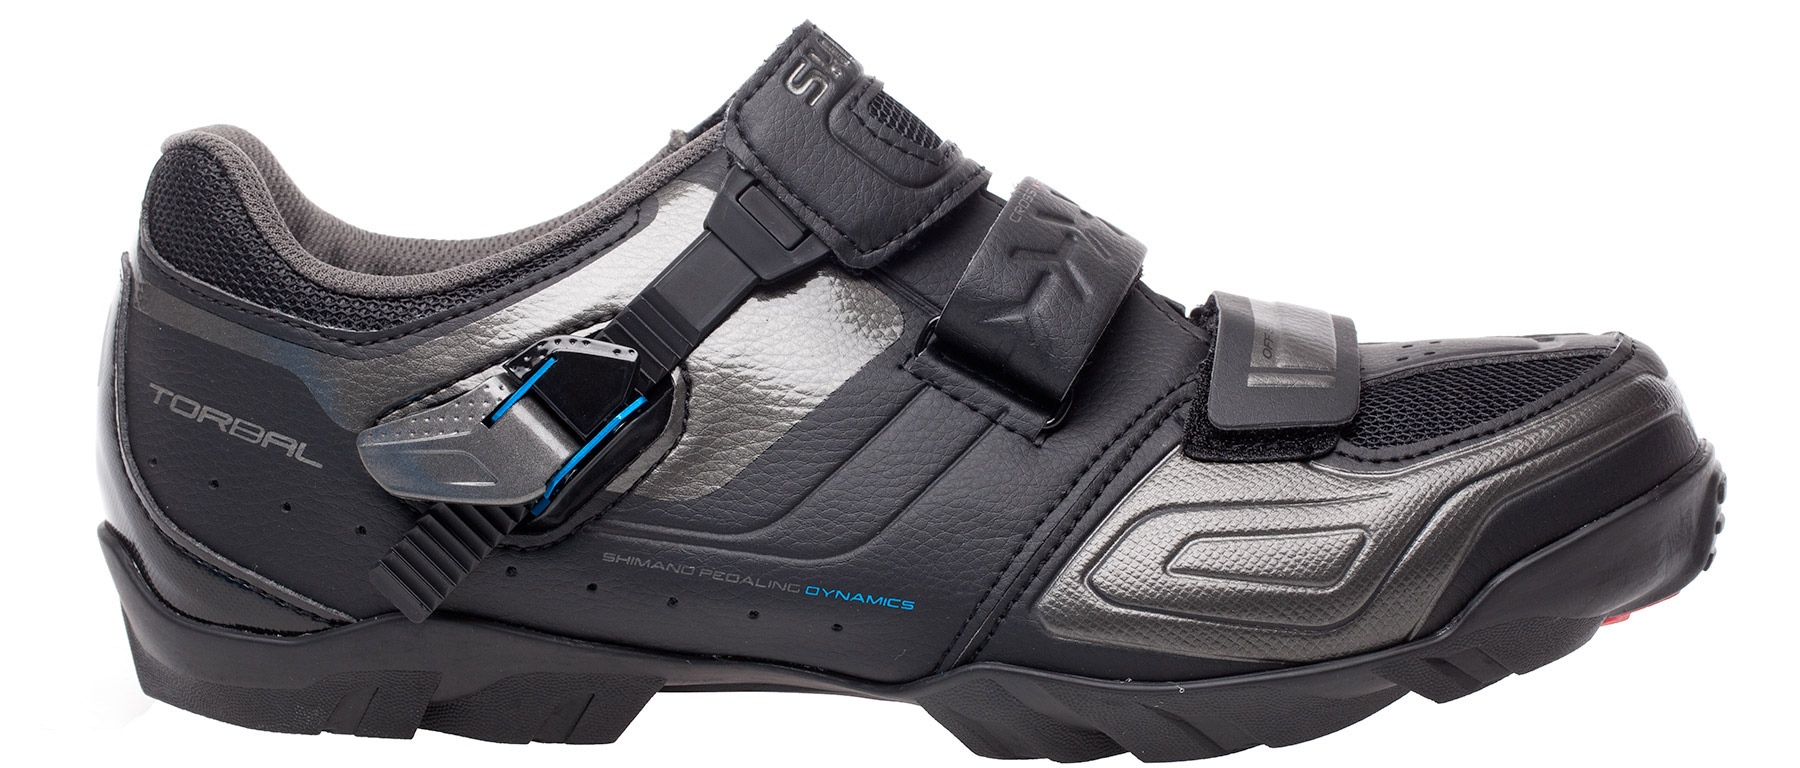 Shimano SH-M089 Mountain Shoes Excel Sports | Shop Online From Boulder ...